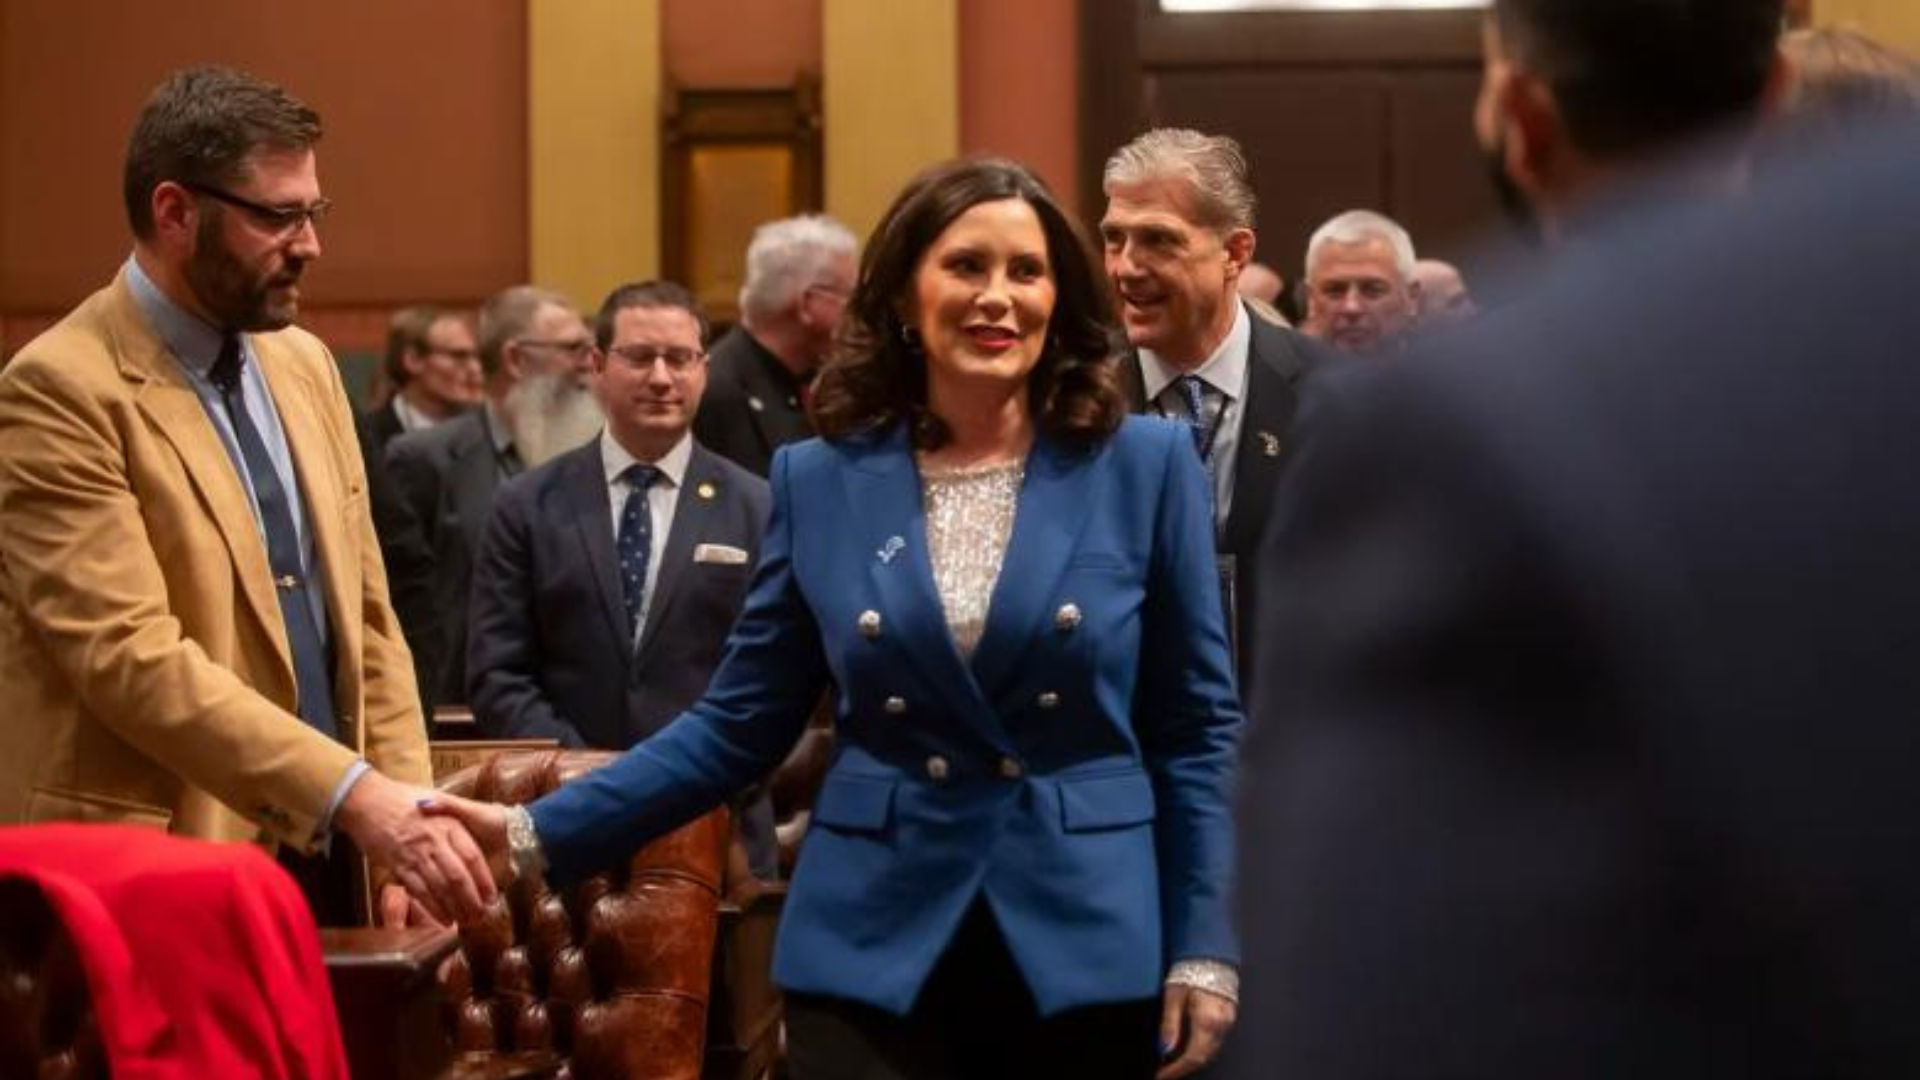 Michigan Gov. Gretchen Whitmer shakes hands with legislators at her sixth State of the State address in the Michigan House Chambers.